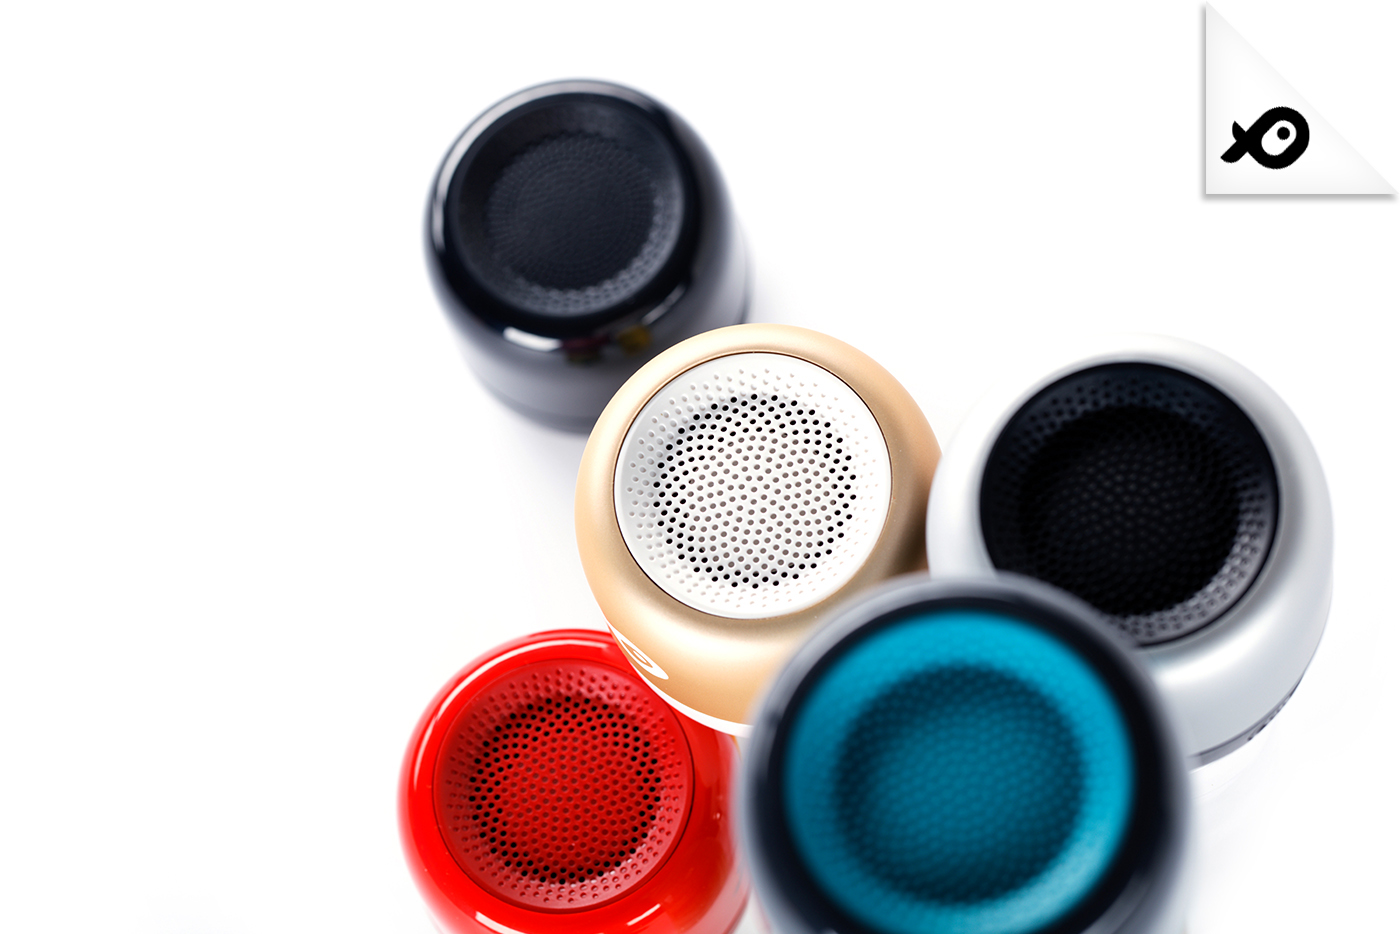 Carrefour design product industrial speaker bluetooth poss design by carrefour